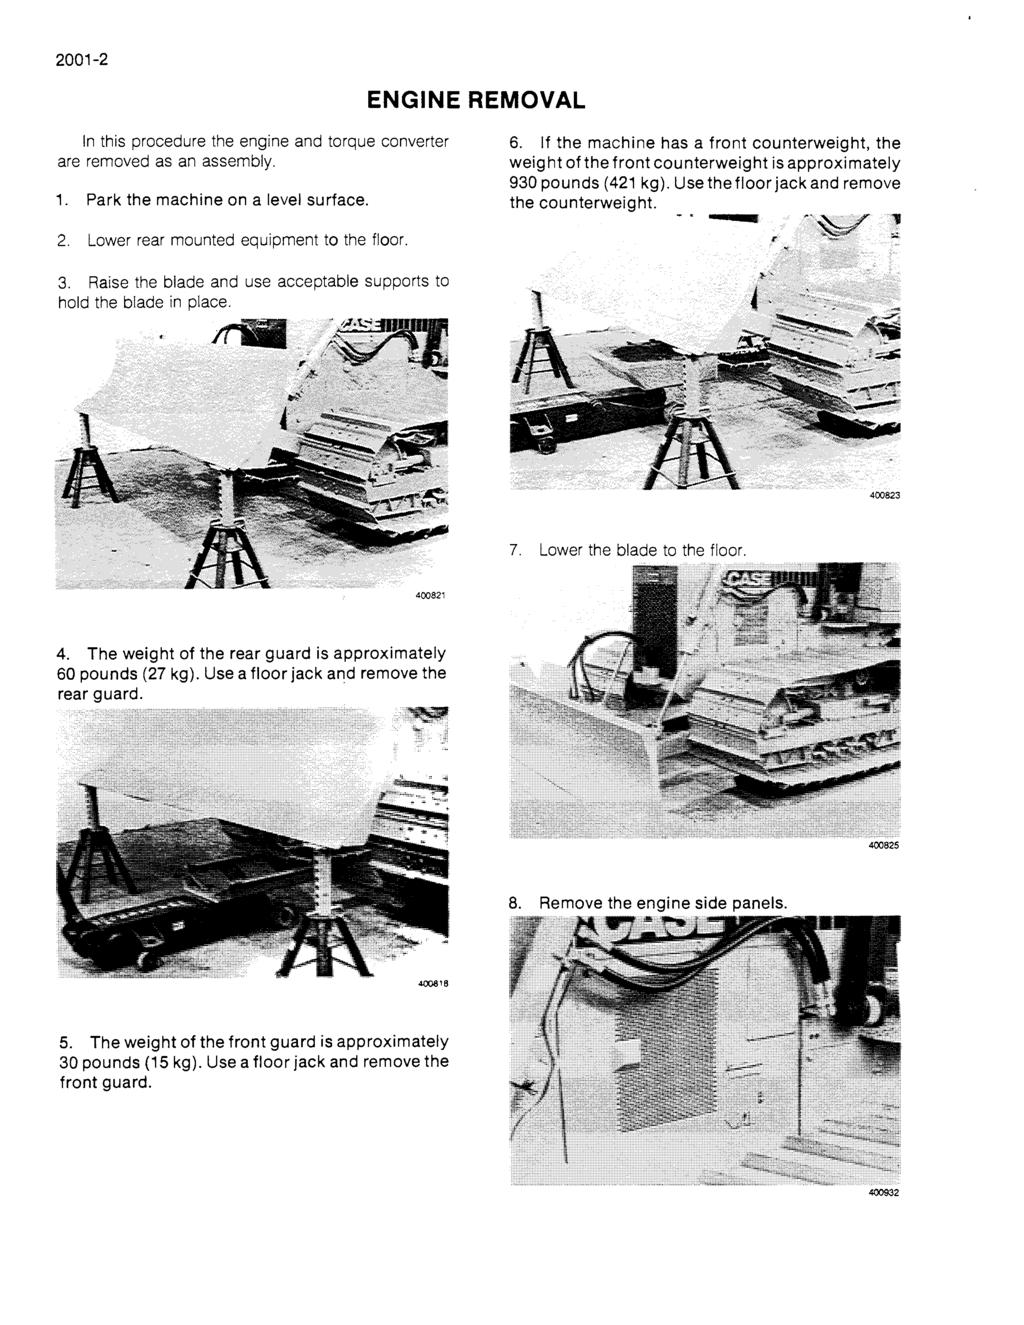 2001-2 ENGINE REMOVAL In this procedure the engine and torque converter are removed as an assembly. 1. Park the machine on a level surface. 2. Lower rear mounted equipment to the floor. 6.